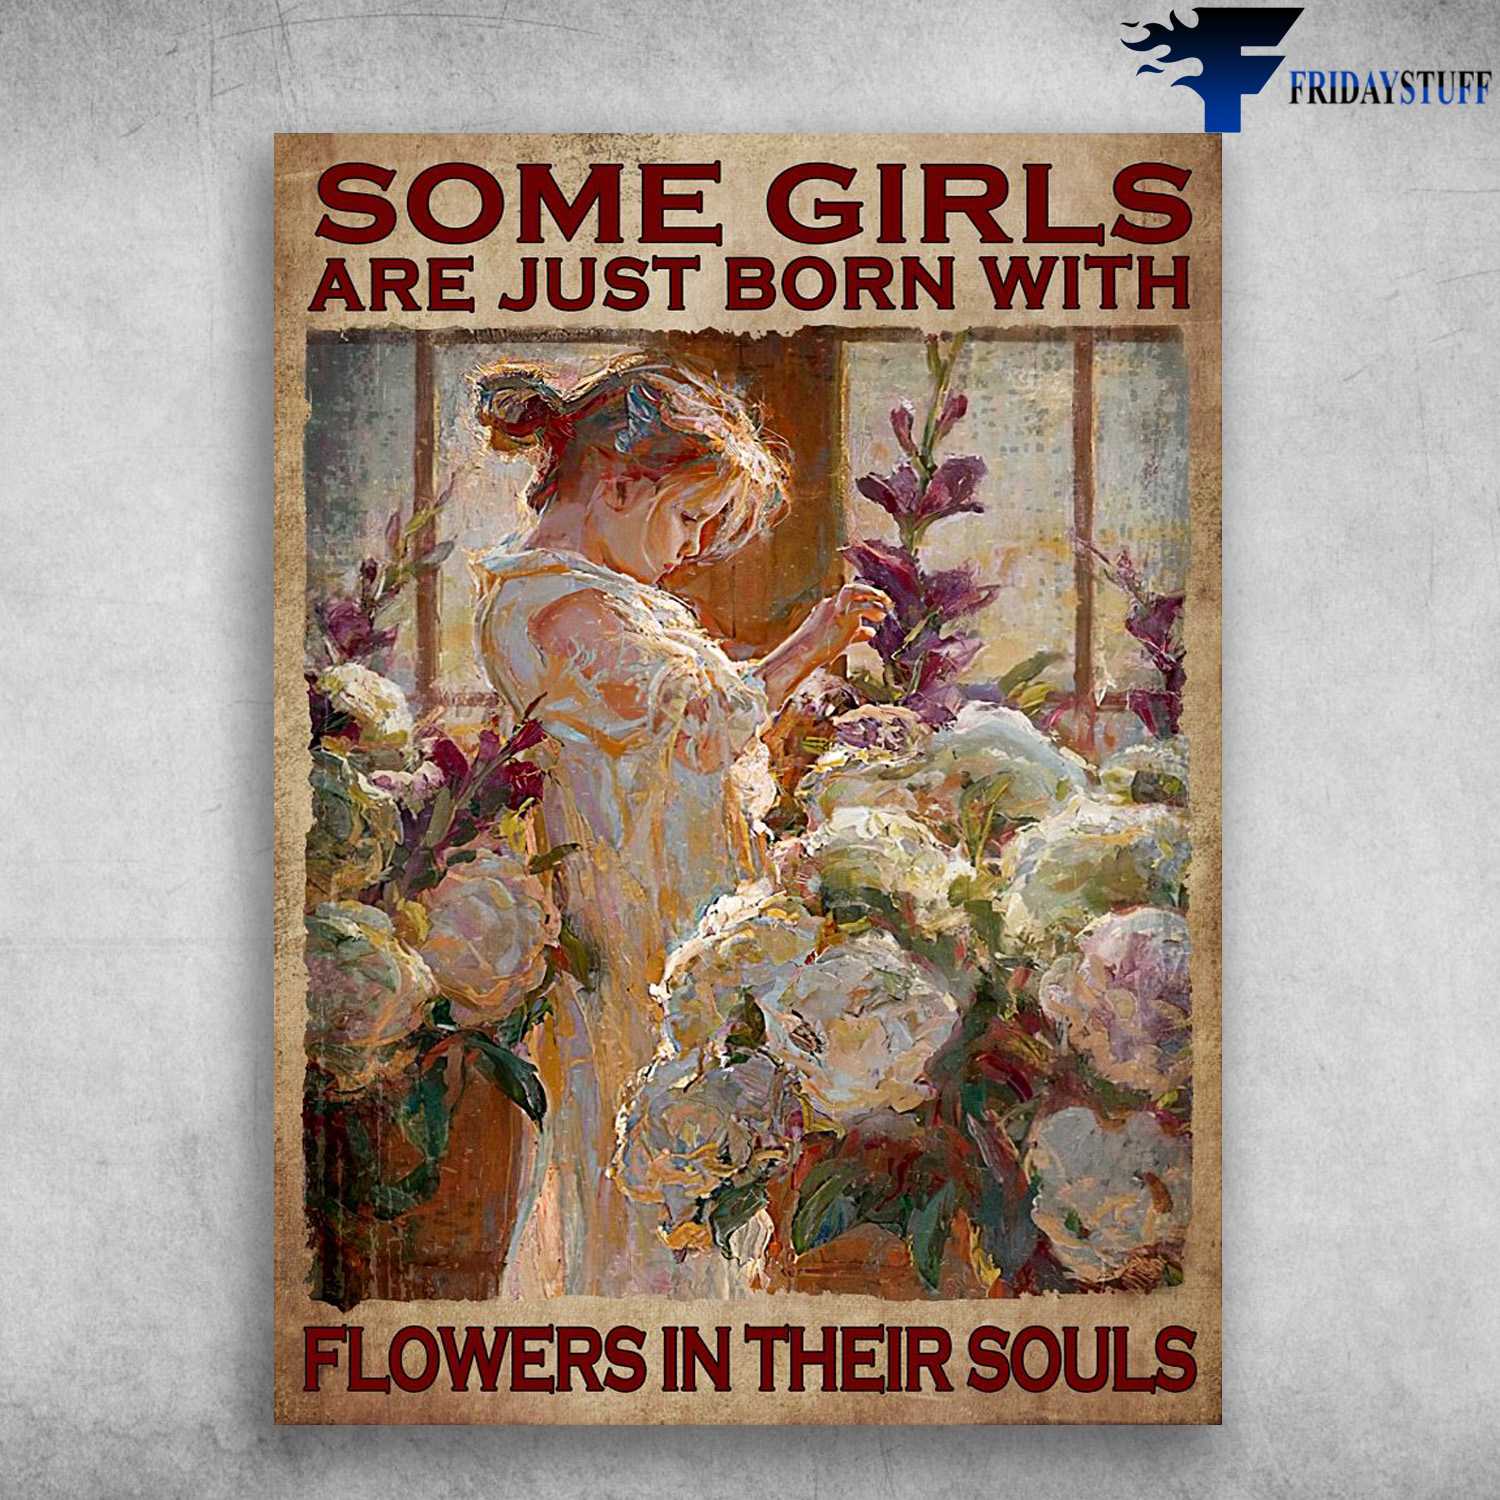 Flower Lover, Gardening Girl - Some Girls Are Just Born With, Flowers In Their Souls